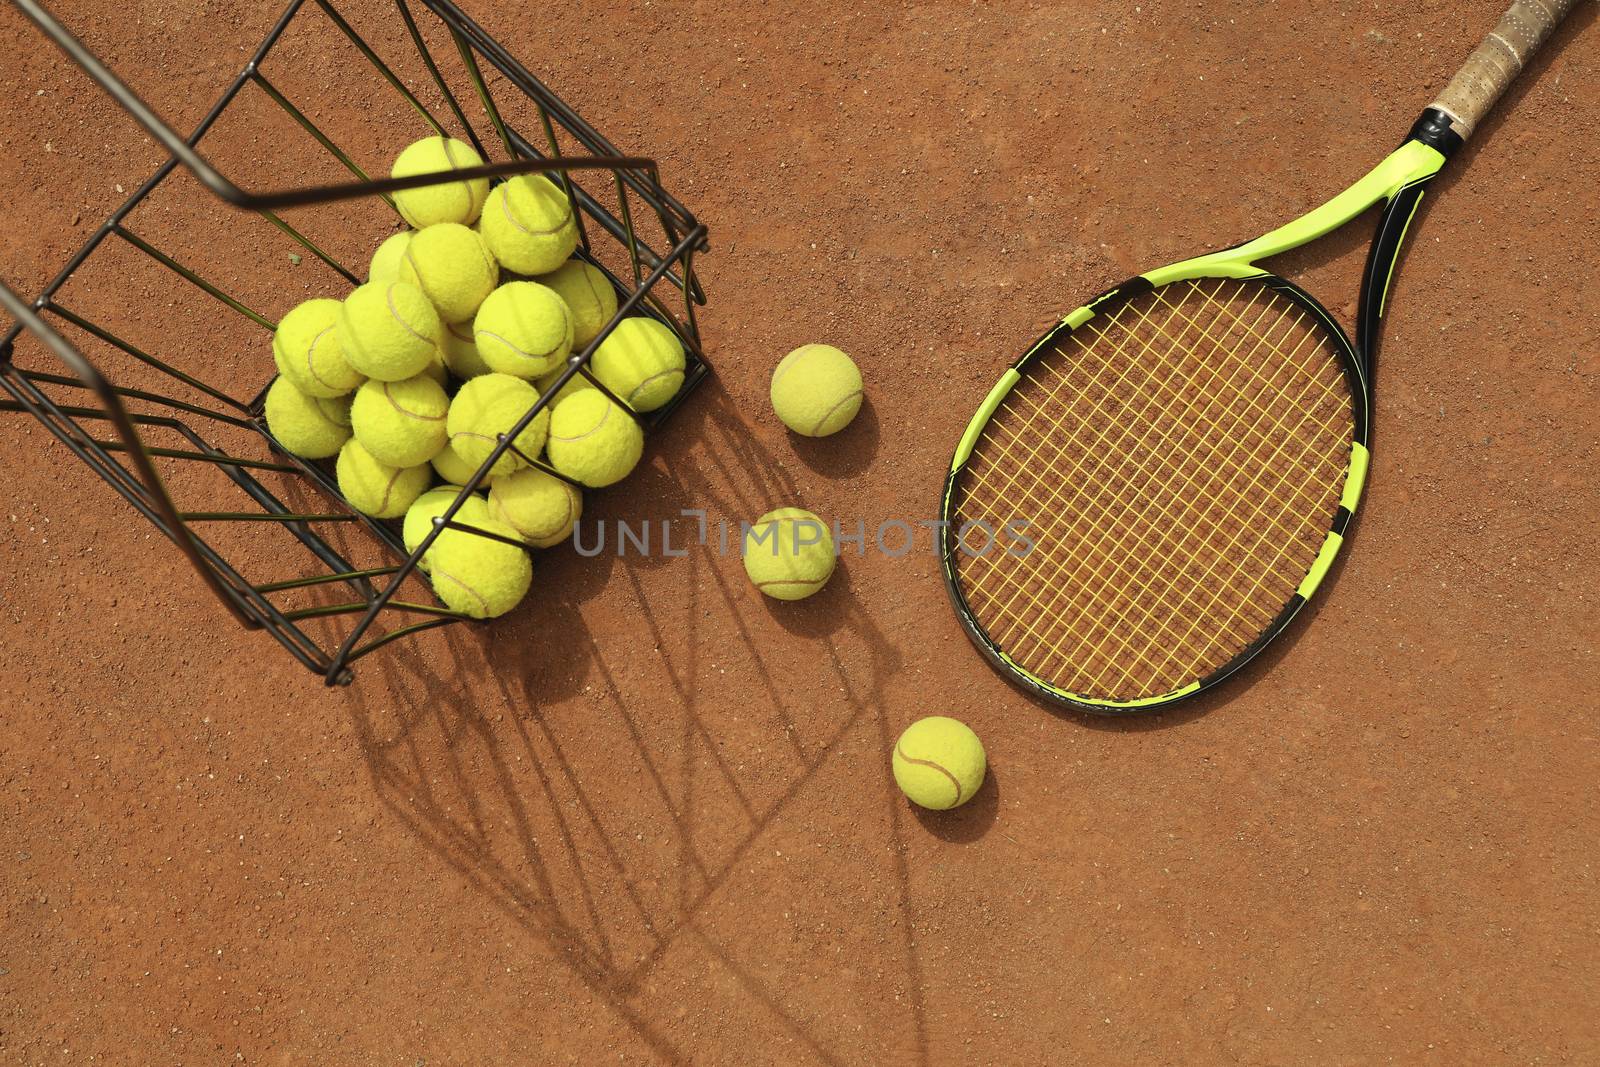 Racket and basket with tennis balls on clay court